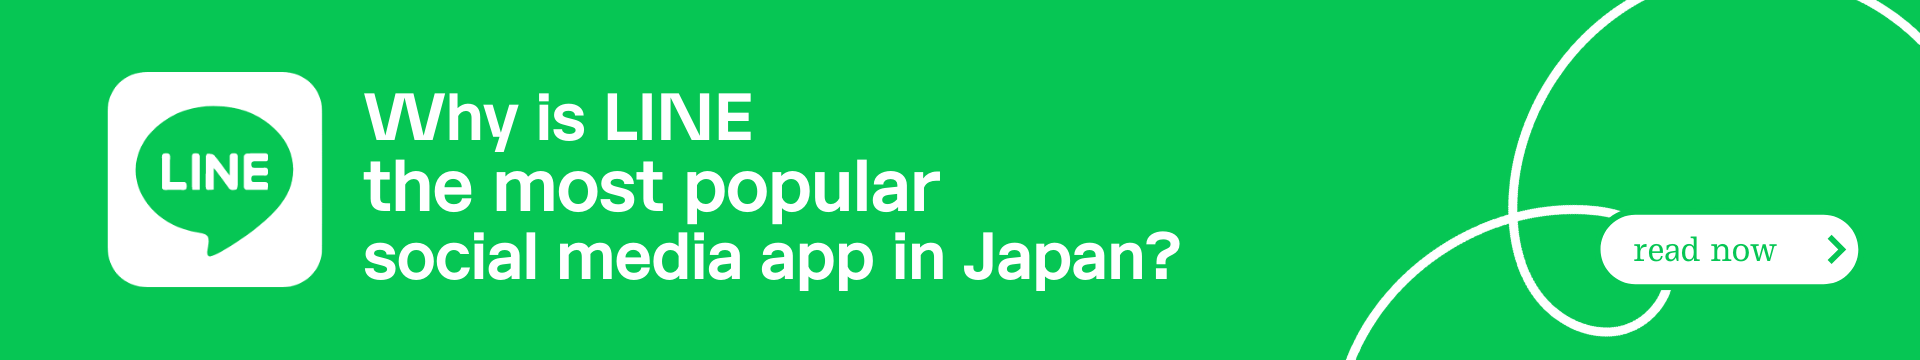 Why is LINE the most popular social media app in Japan (1)